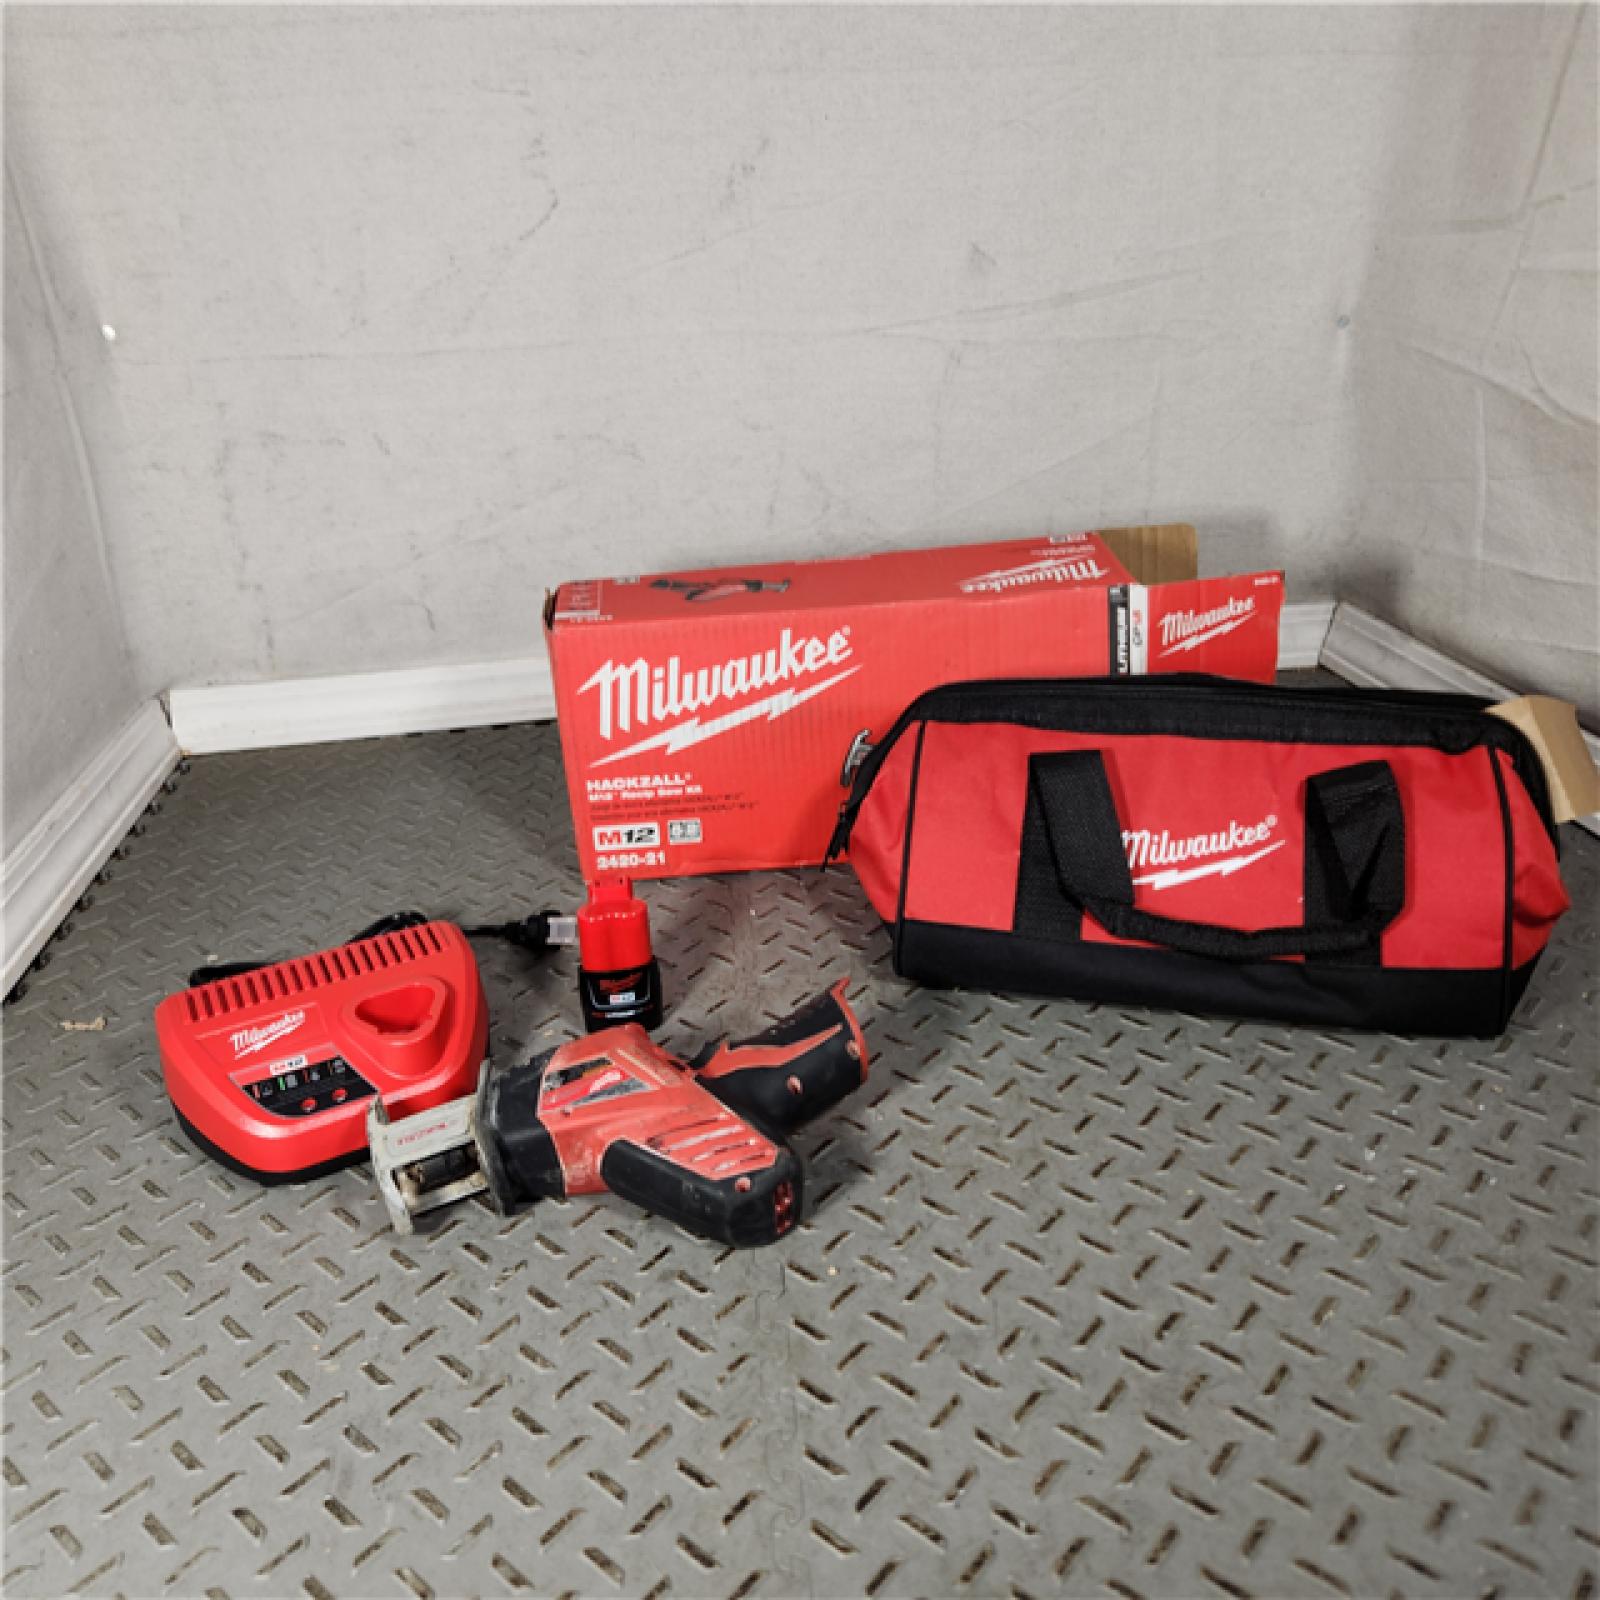 Houston Location - As-Is Milwaukee 2420-21 - M12 Fuel Hackzall 1/2  12V 1.5Ah Cordless Straight Handle Reciprocating Saw Kit - Appears IN USED Condition